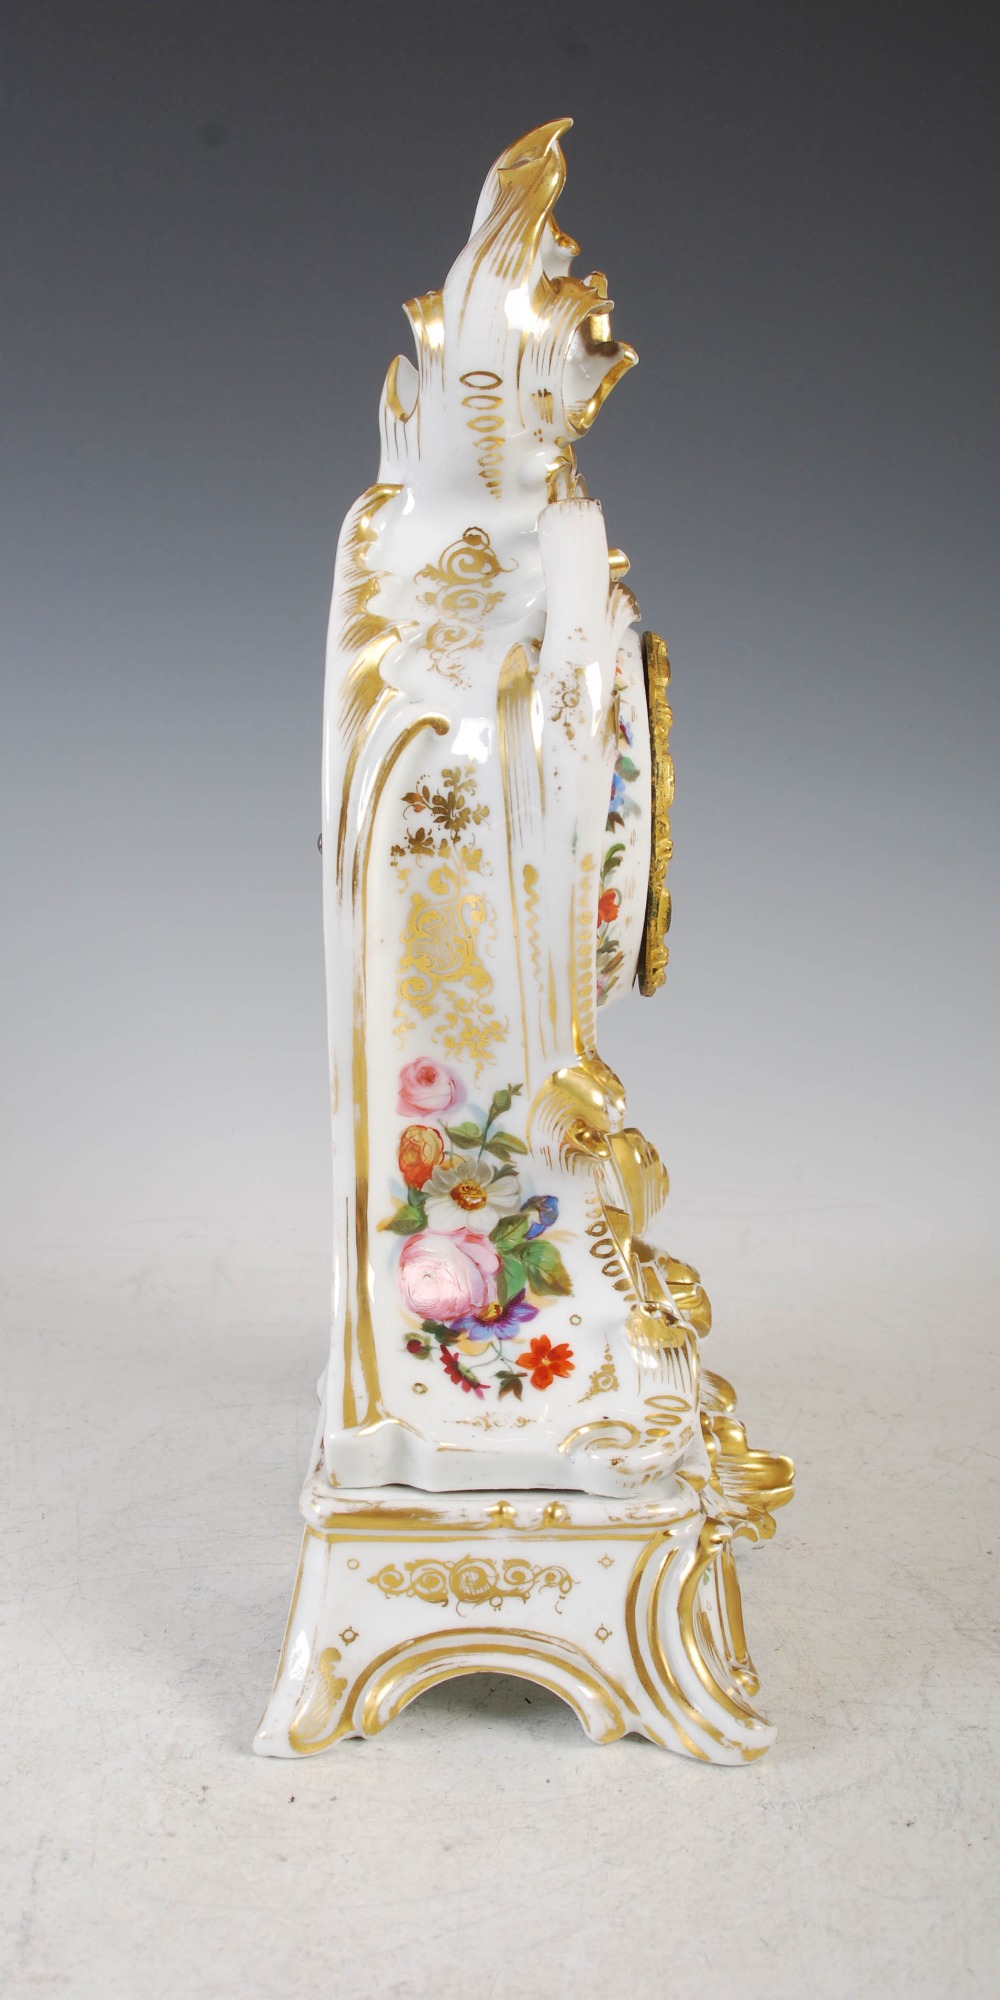 Thomas, Paris, a 19th century Paris porcelain and ormolu mounted Rococo style mantel clock on stand, - Image 5 of 13